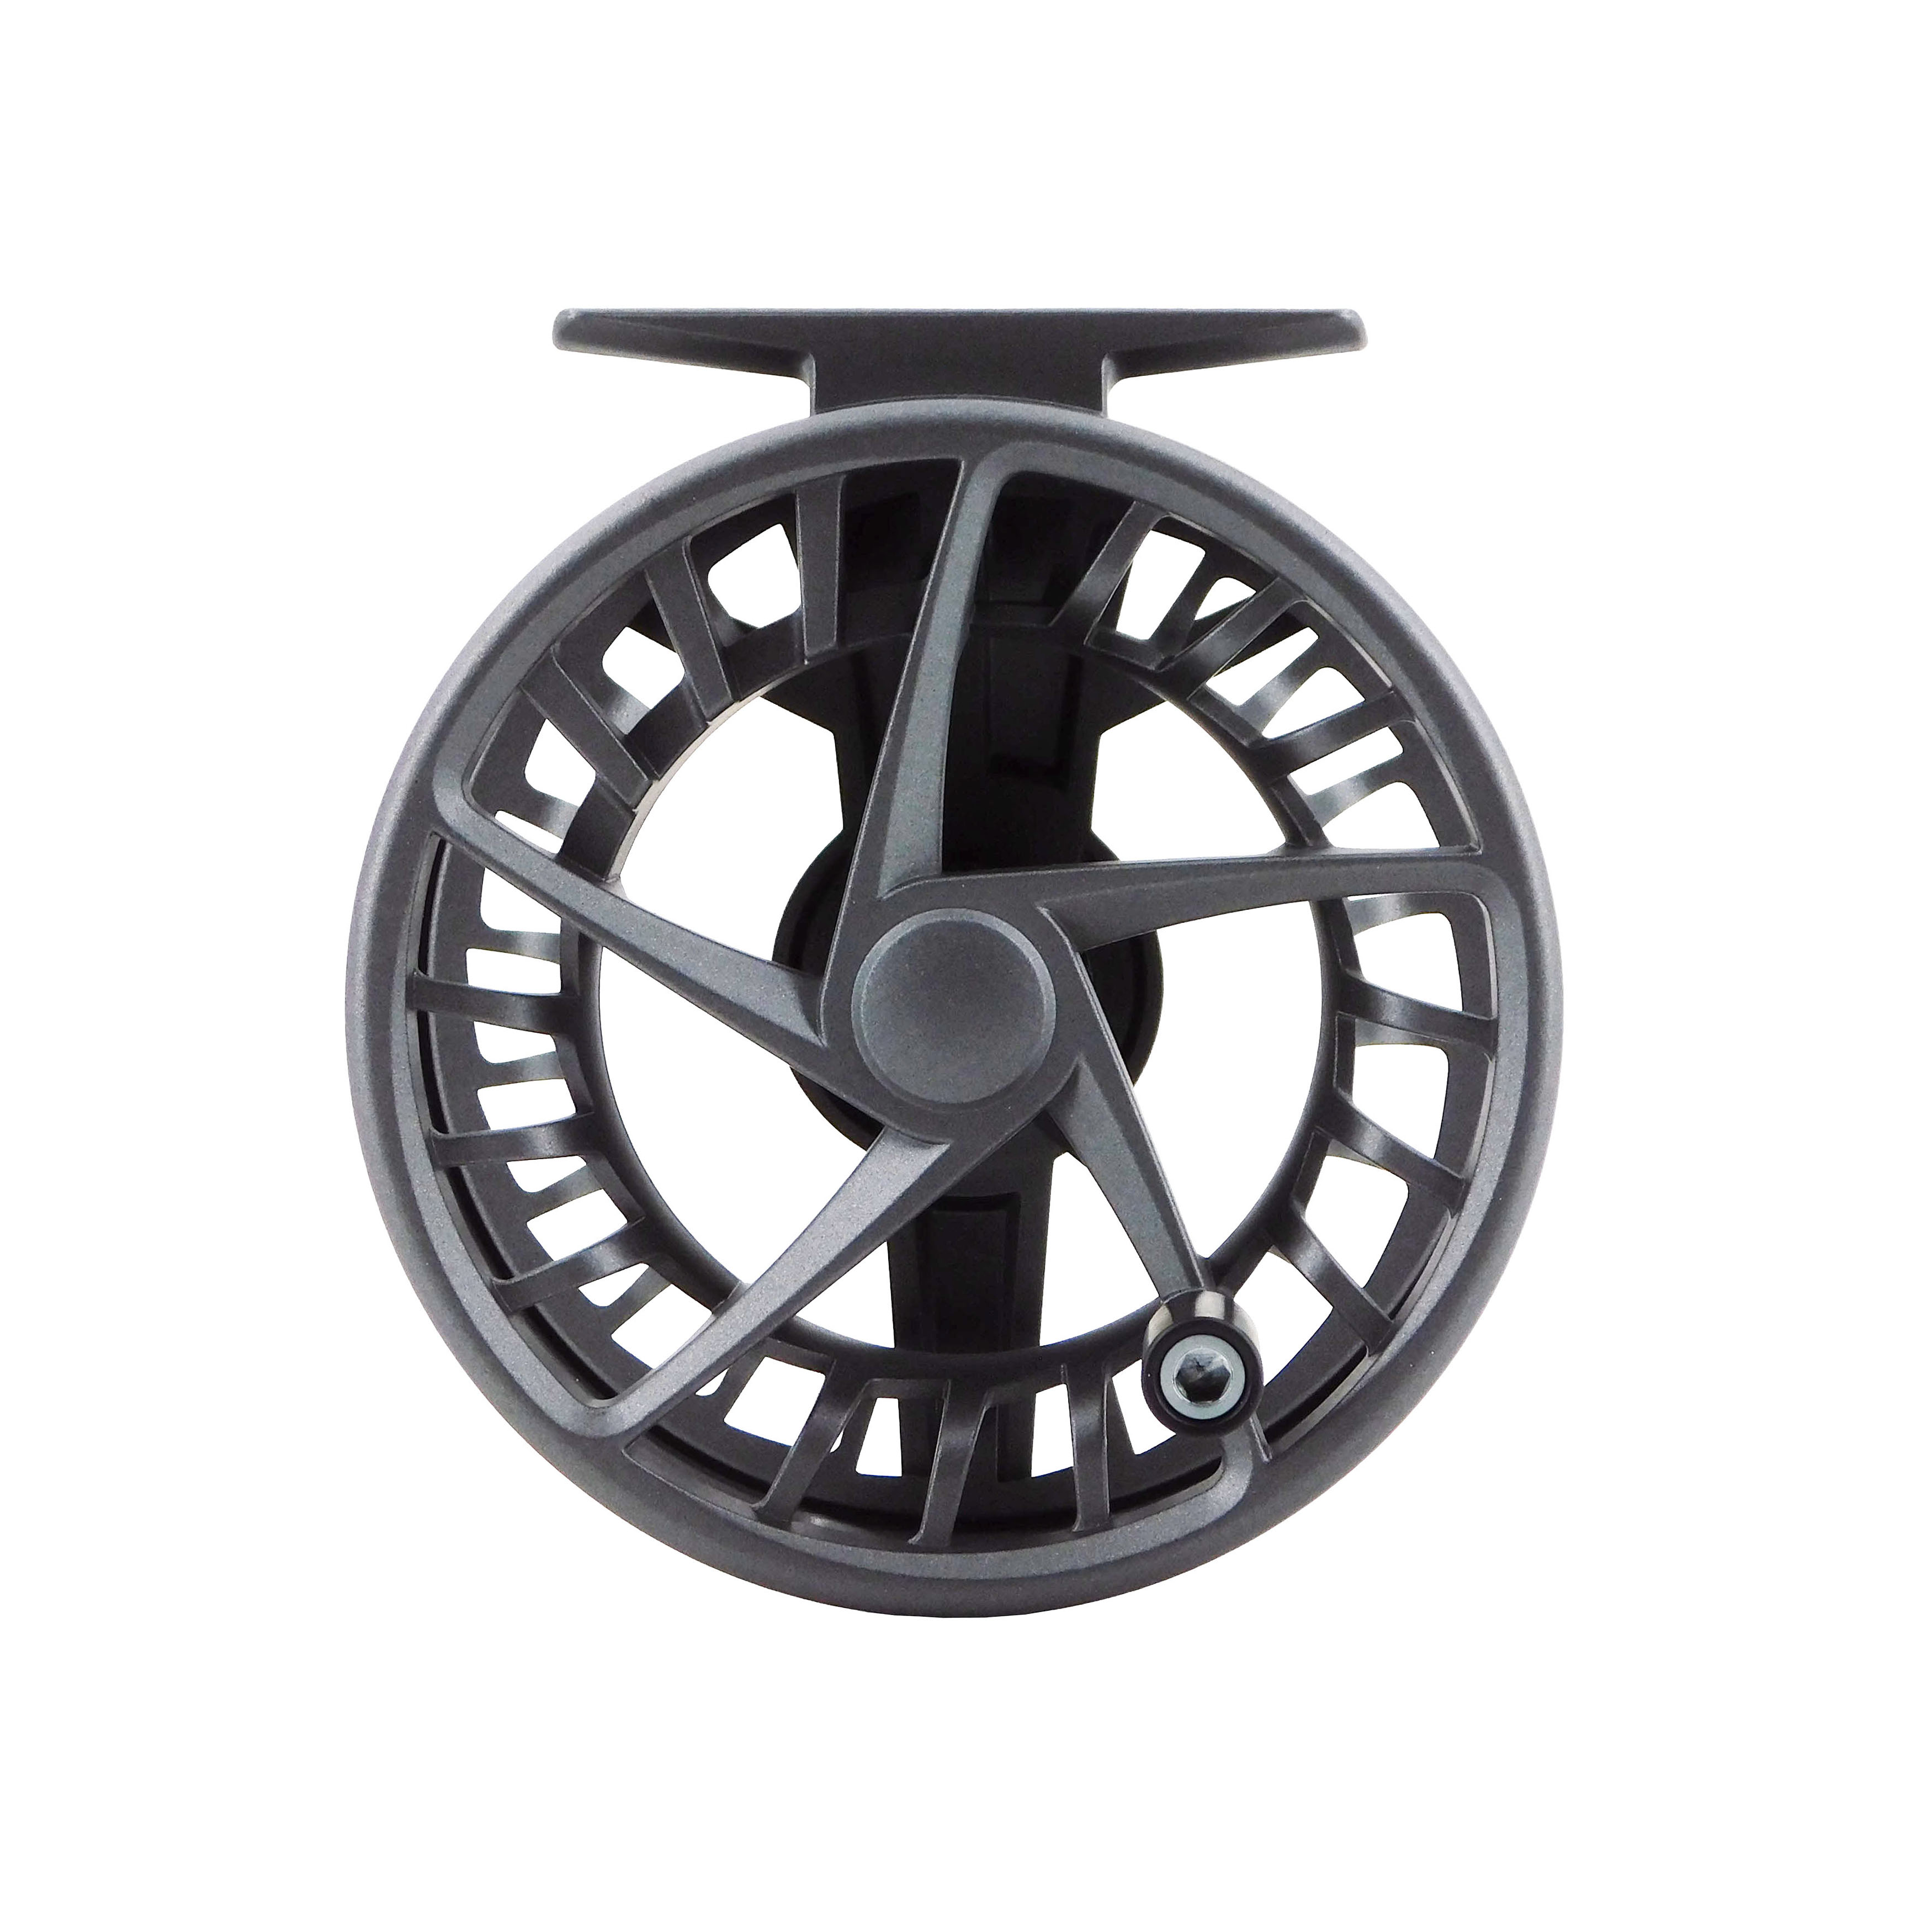 Fly Fishing Reels by Lamson, Hatch Outdoors, Galvan, Tibor, Hardy